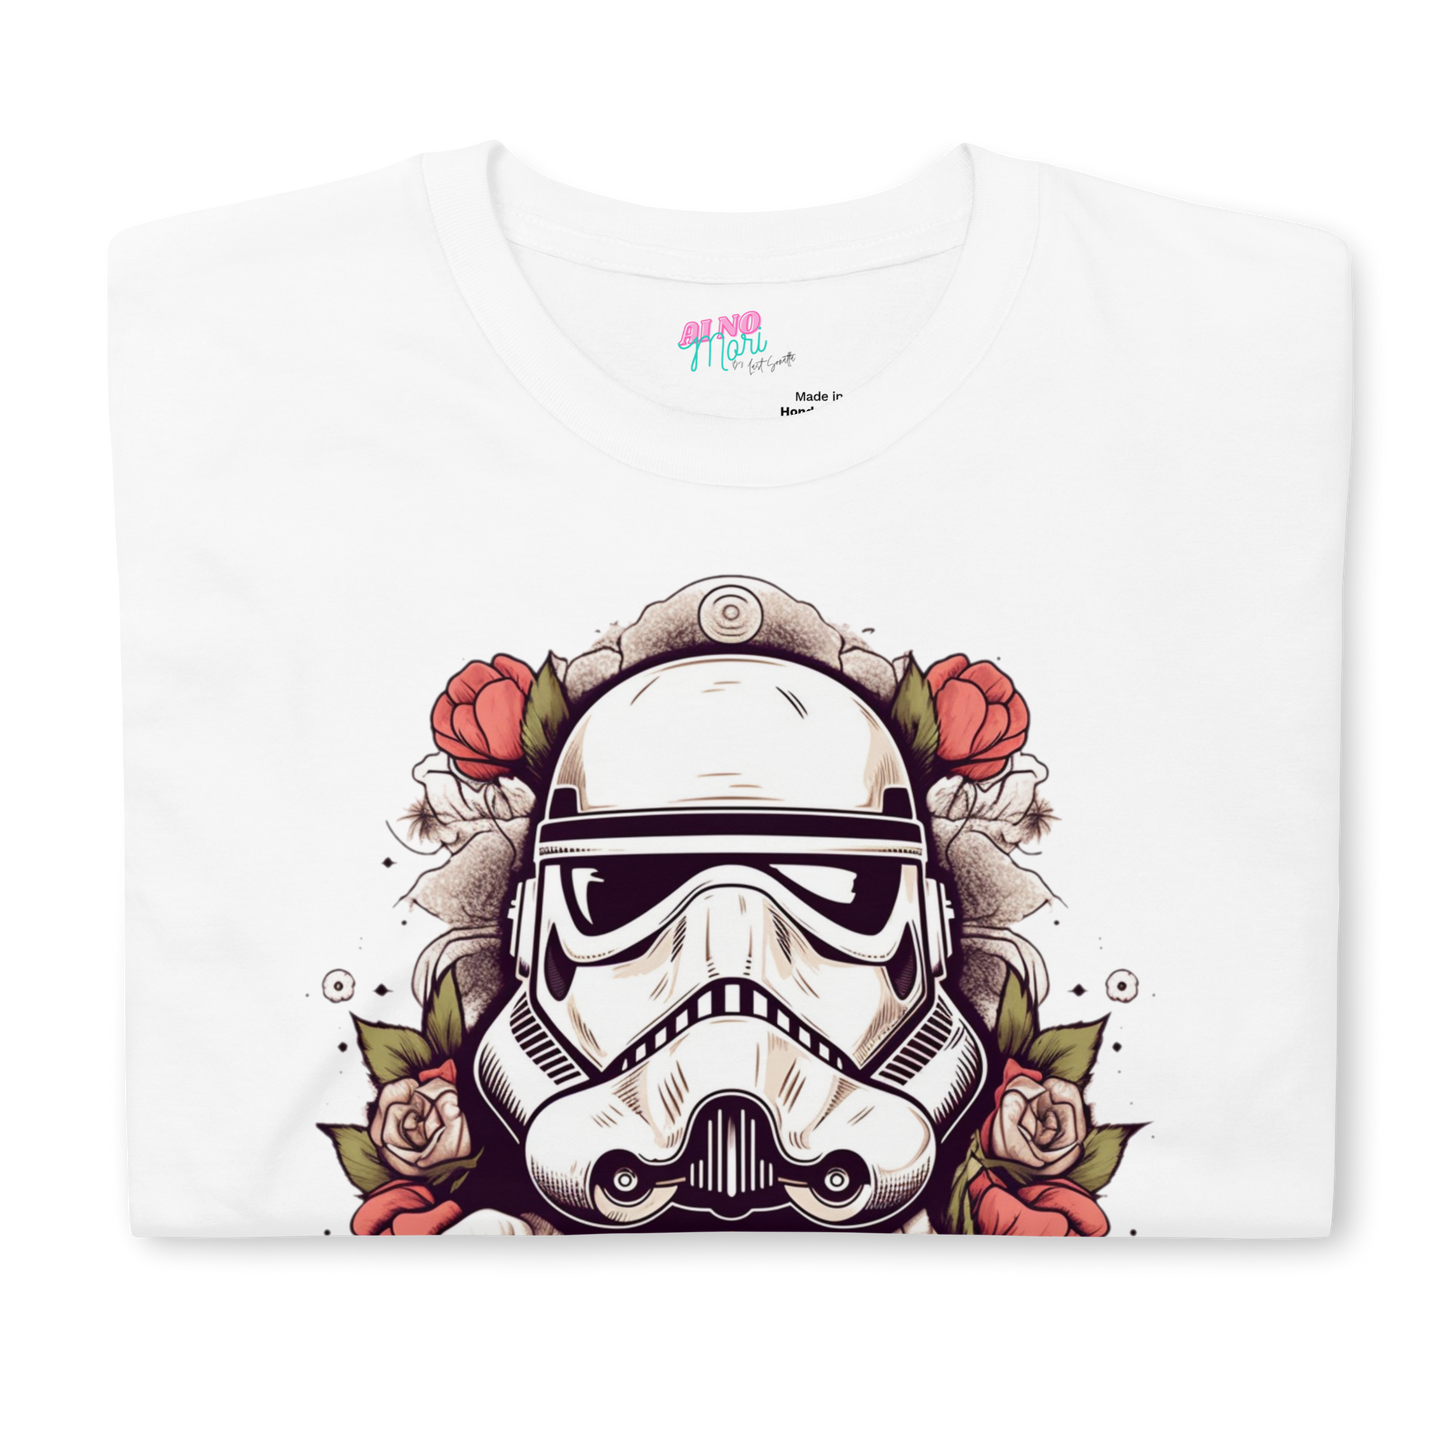 Trooper Graphic T-Shirt, Premium Graphic Tees, Cool Design T Shirts,  Streetwear Casual Summer Tops T-Shirt Unisex